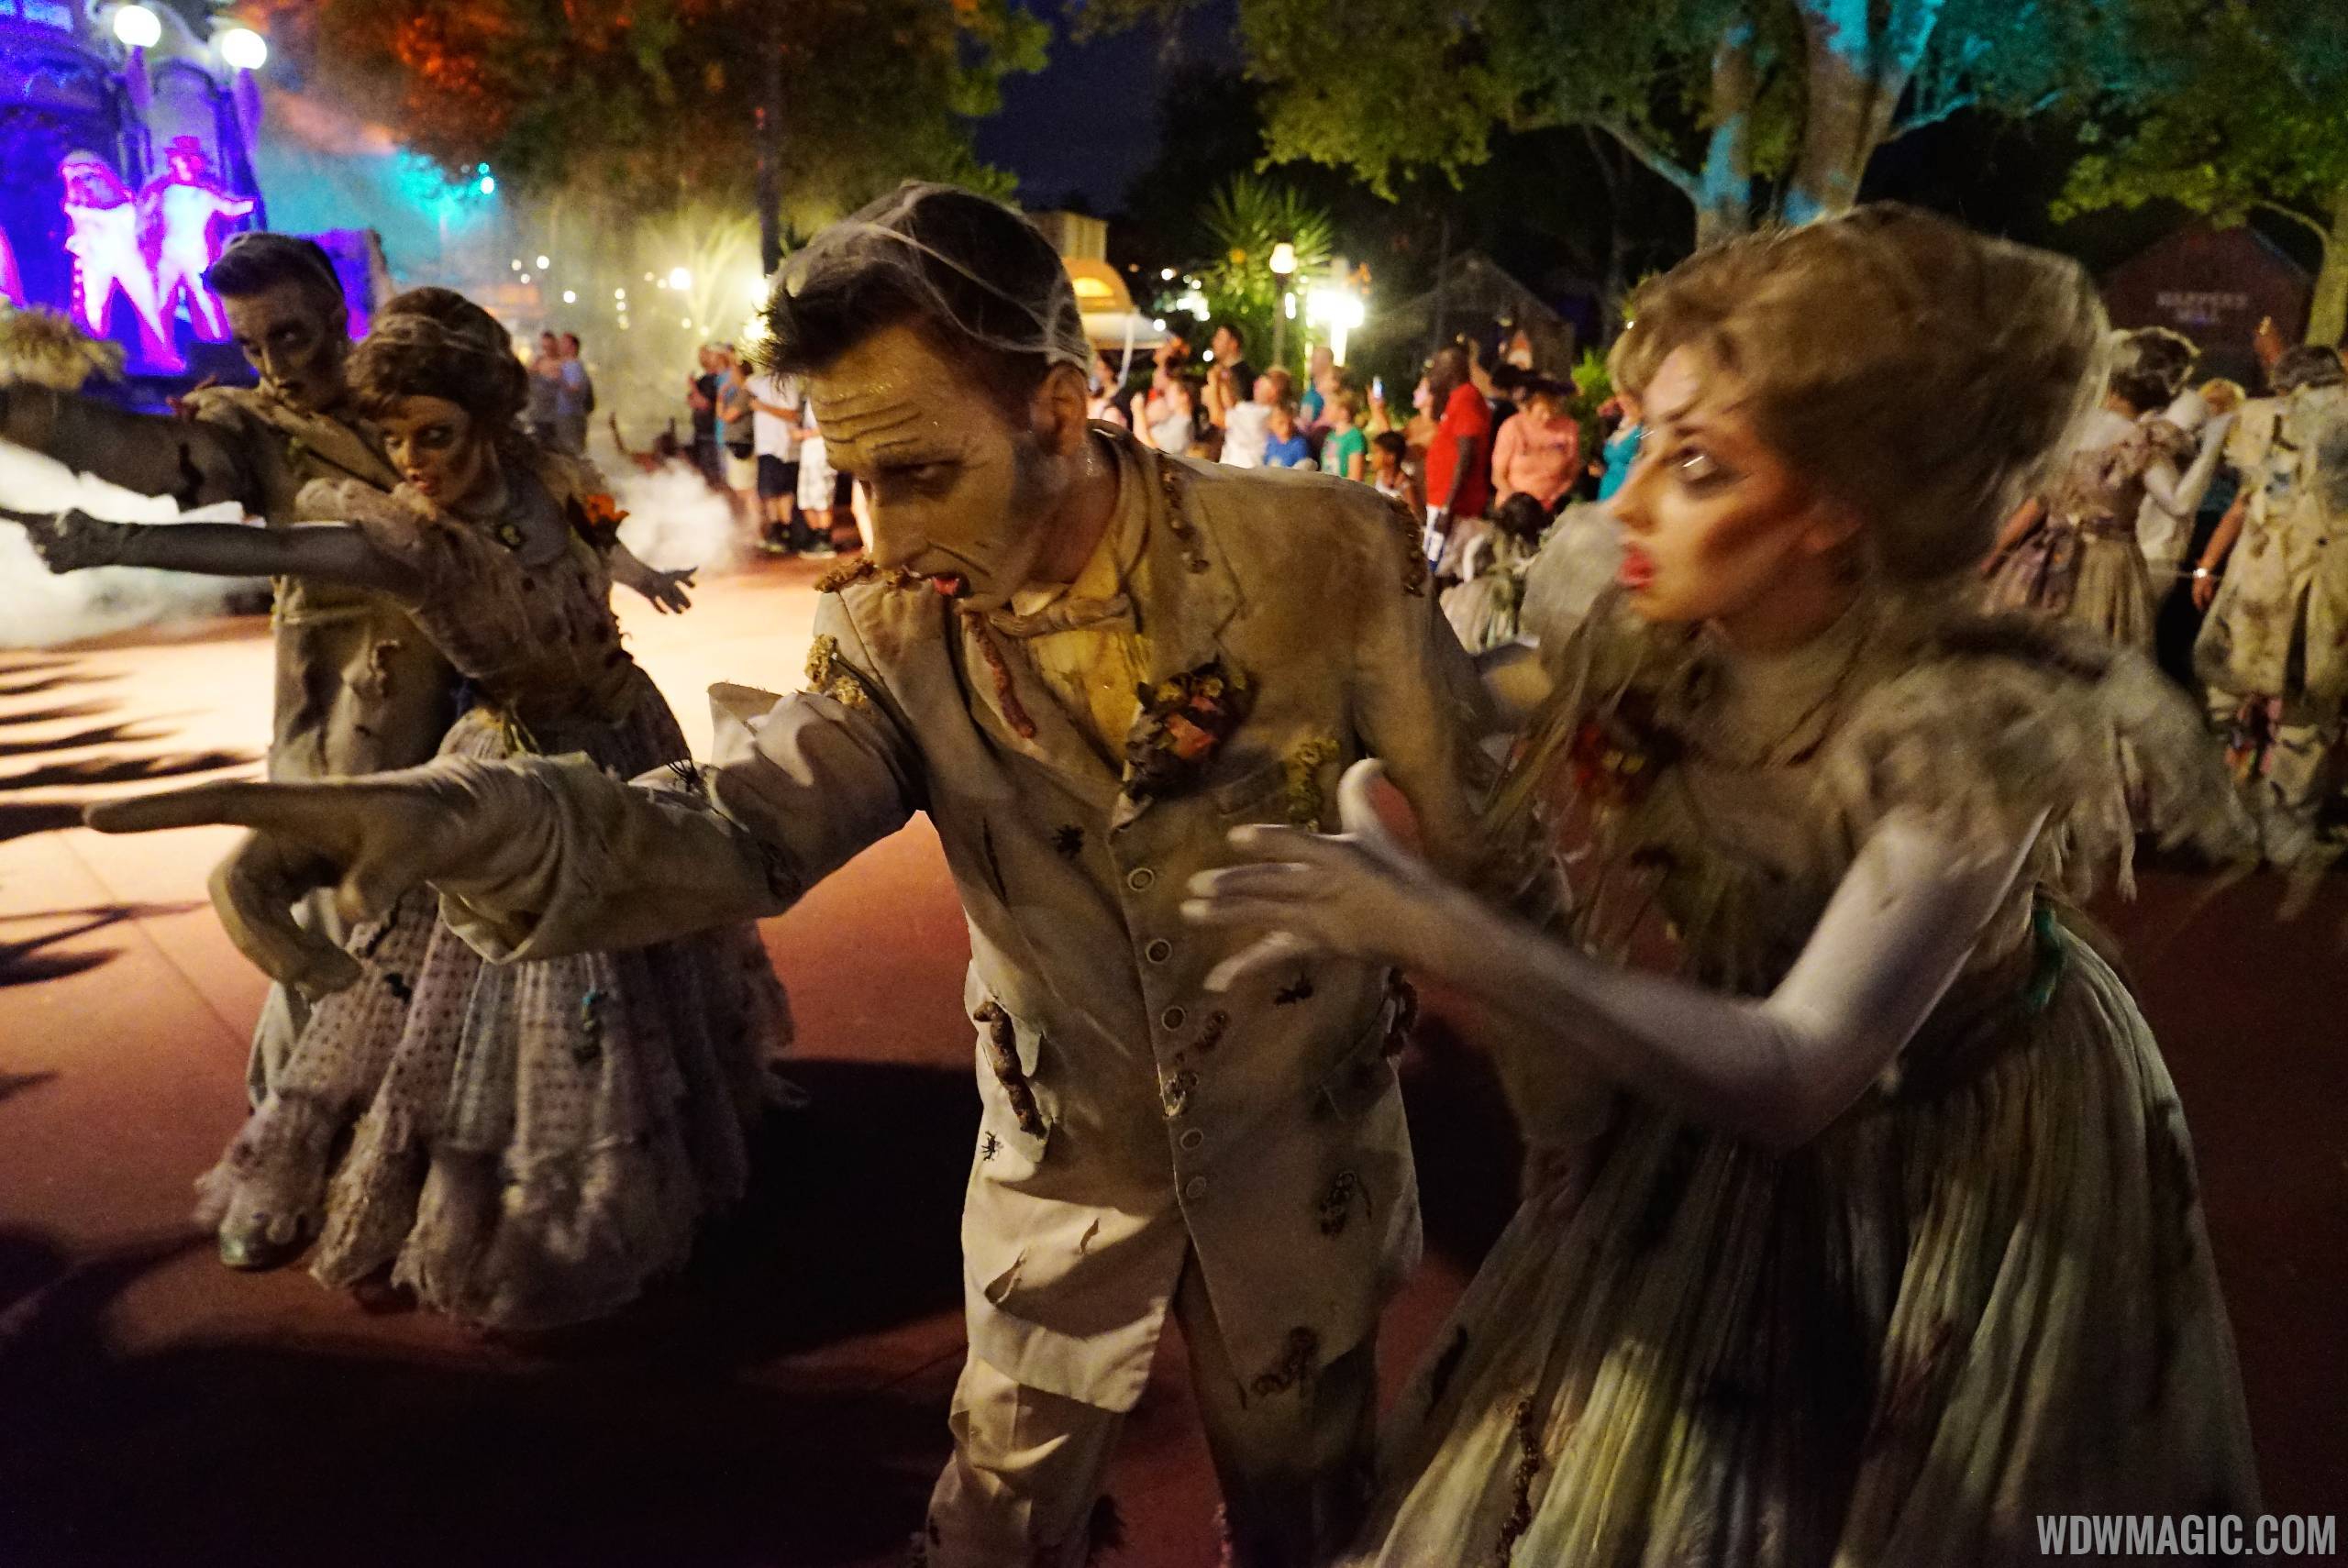 Boo To You Parade - Haunted Mansion unit